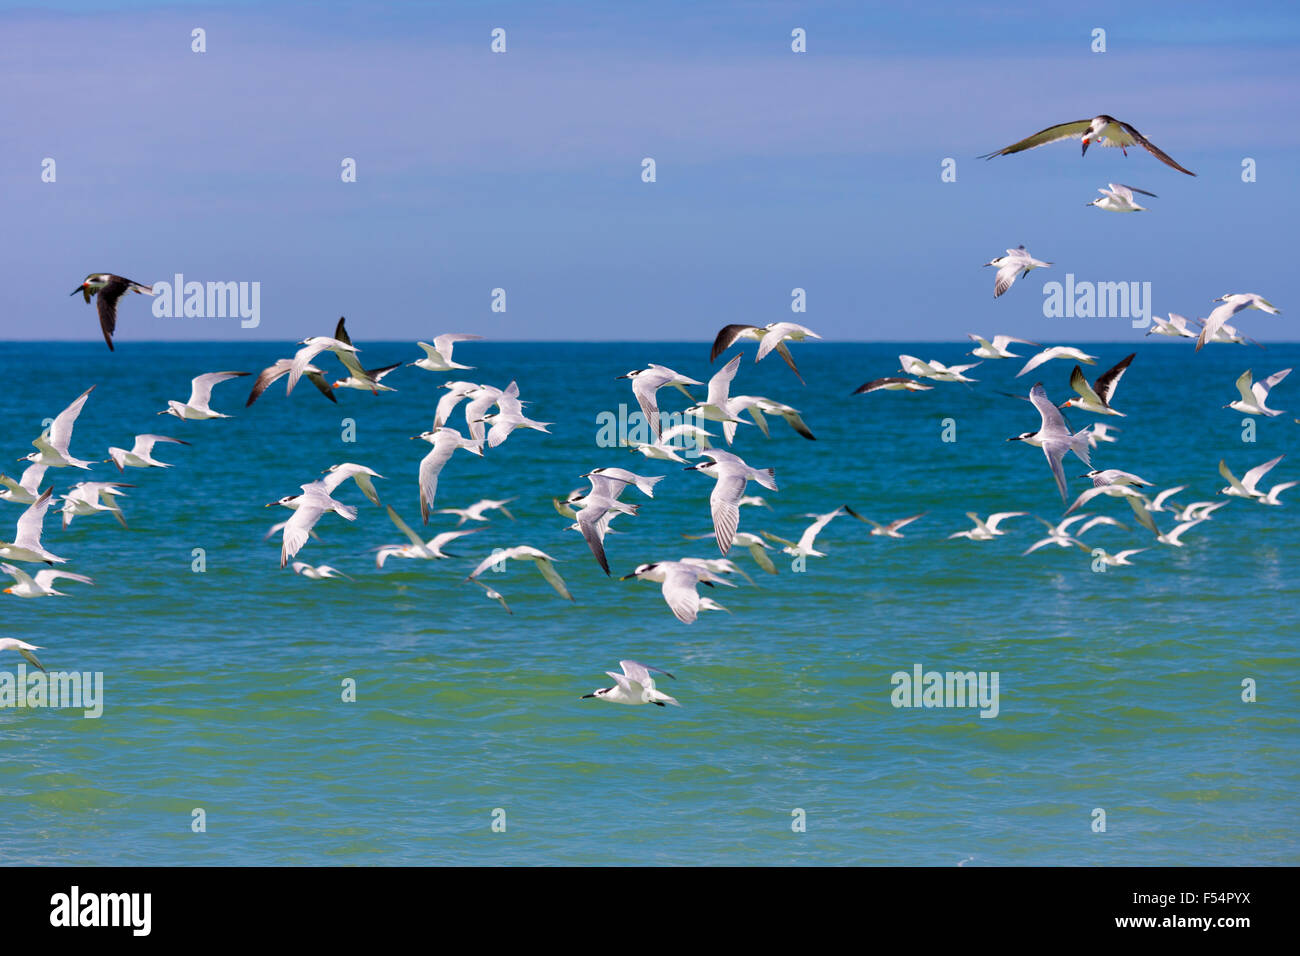 Flock of Shorebirds and Waders - Skimmers, Willets, Terns - in flight shoreline of the coast at Captiva Island, Florida, USA Stock Photo